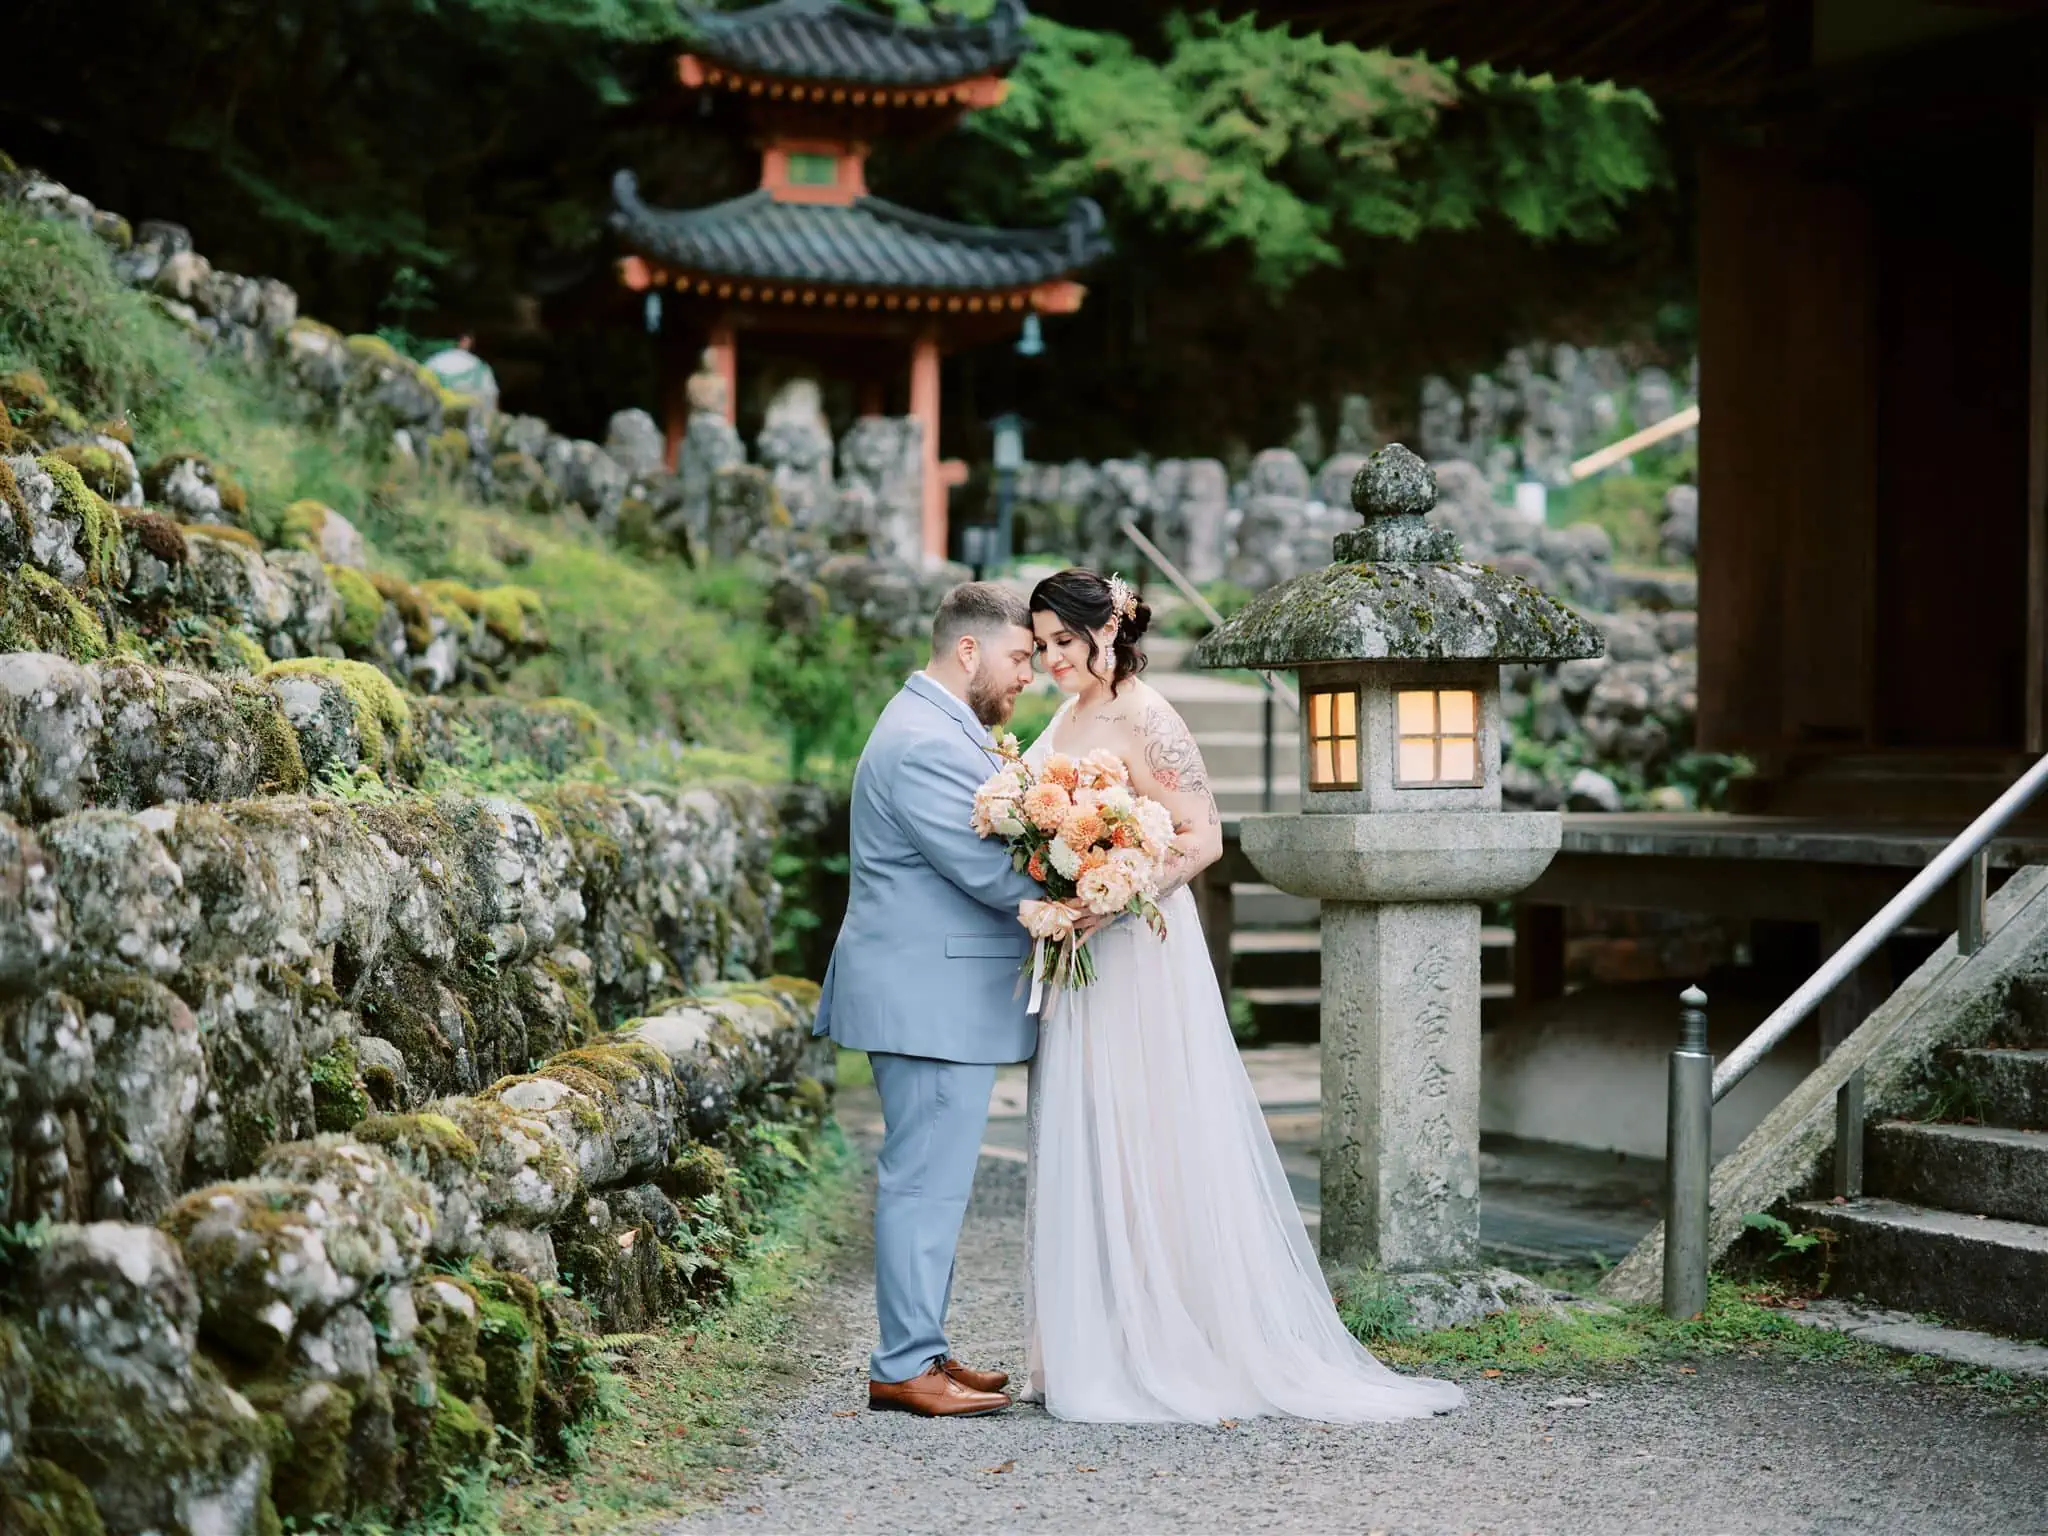 Japan Elopement Wedding Photographer, Planner & Videographer | A bride and groom embracing in front of a Japanese pagoda during their Queenstown Heli-Wedding & Elopement Package.